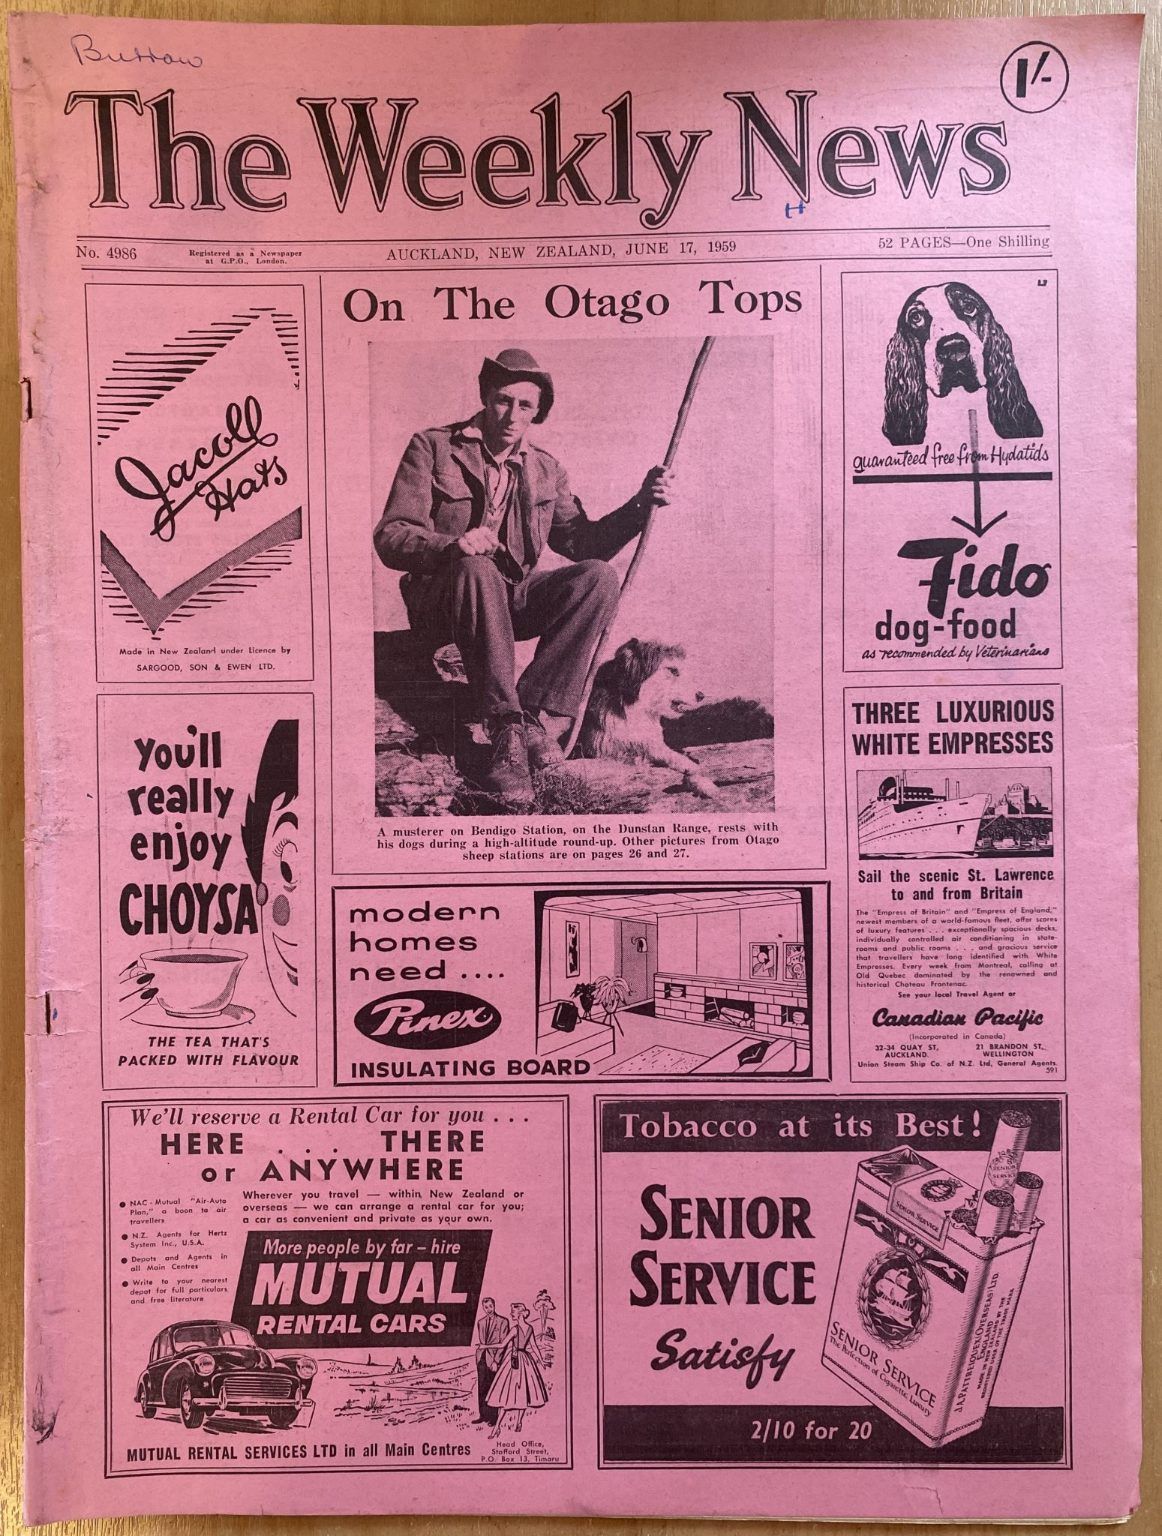 OLD NEWSPAPER: The Weekly News - No. 4986, 17 June 1959